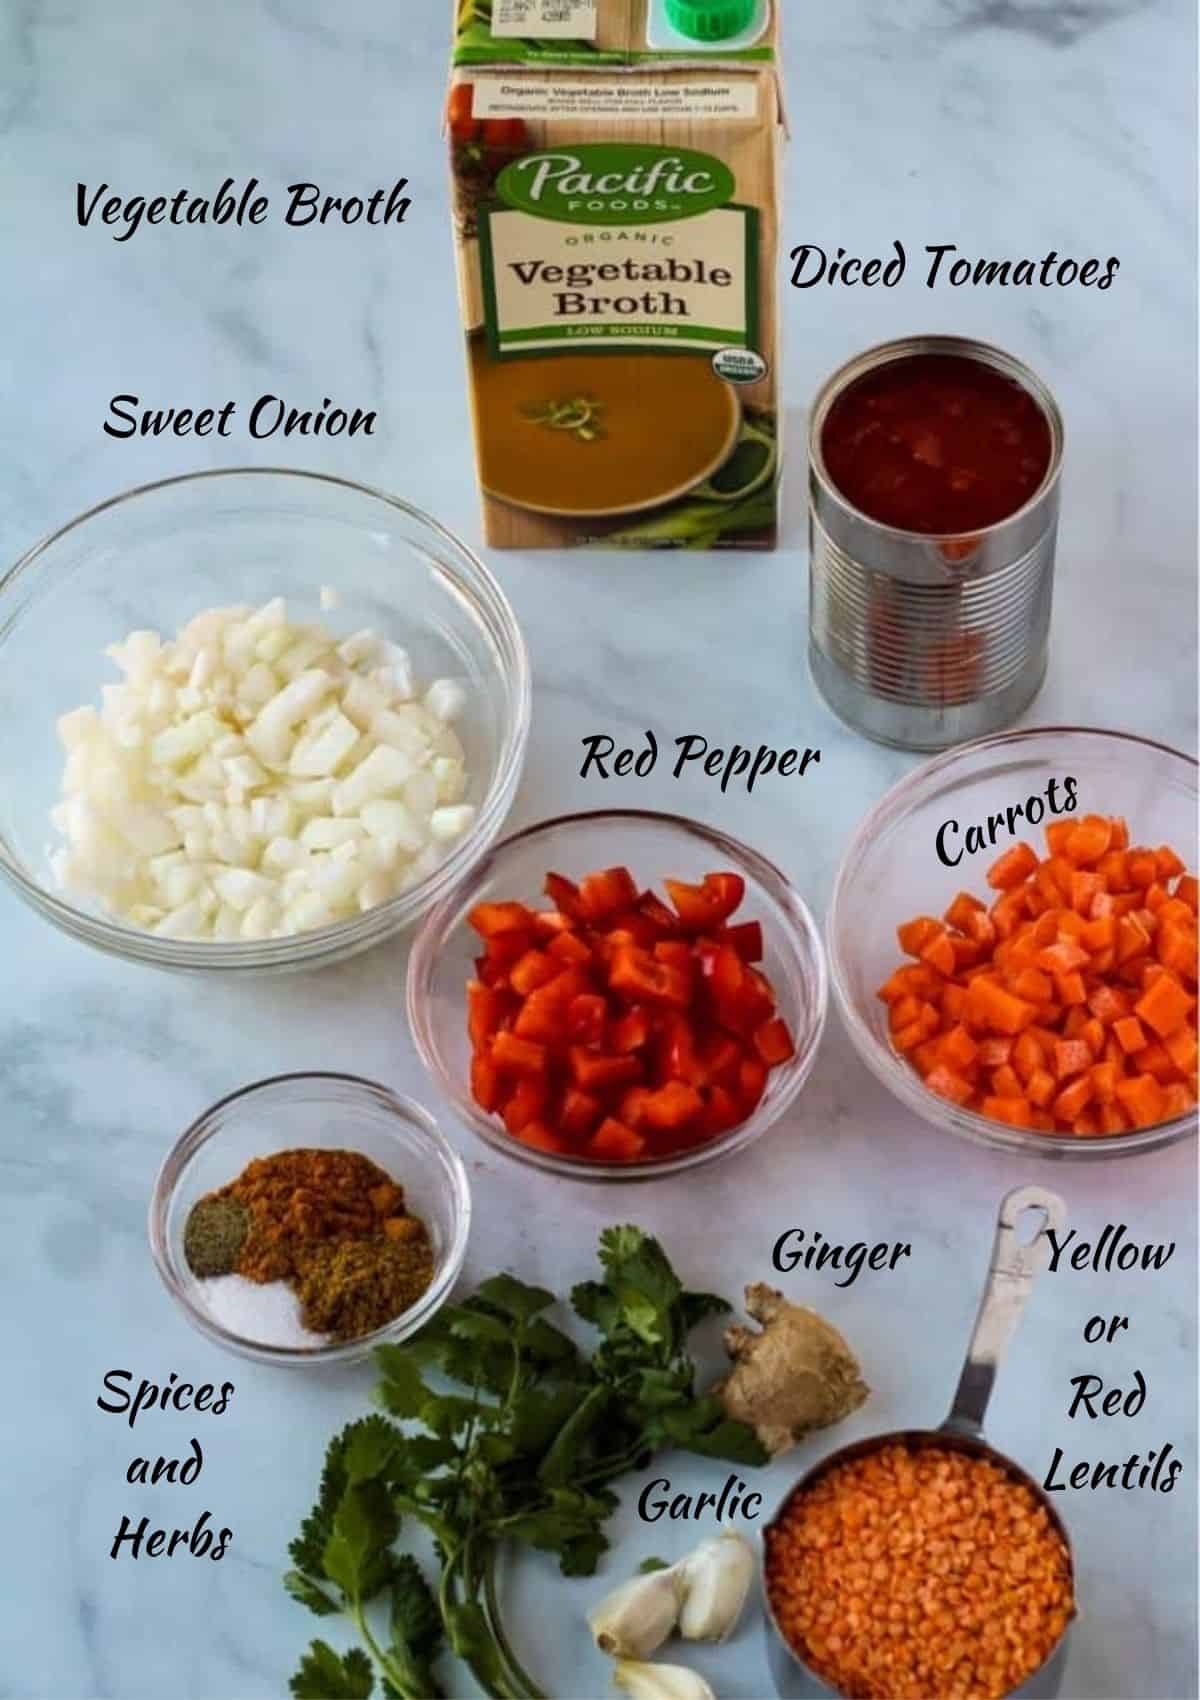 All the ingredients needed to make vegan curried lentils. Vegetable broth, diced tomatoes, diced onion, red pepper, carrots, ginger, spices, red lentils. 